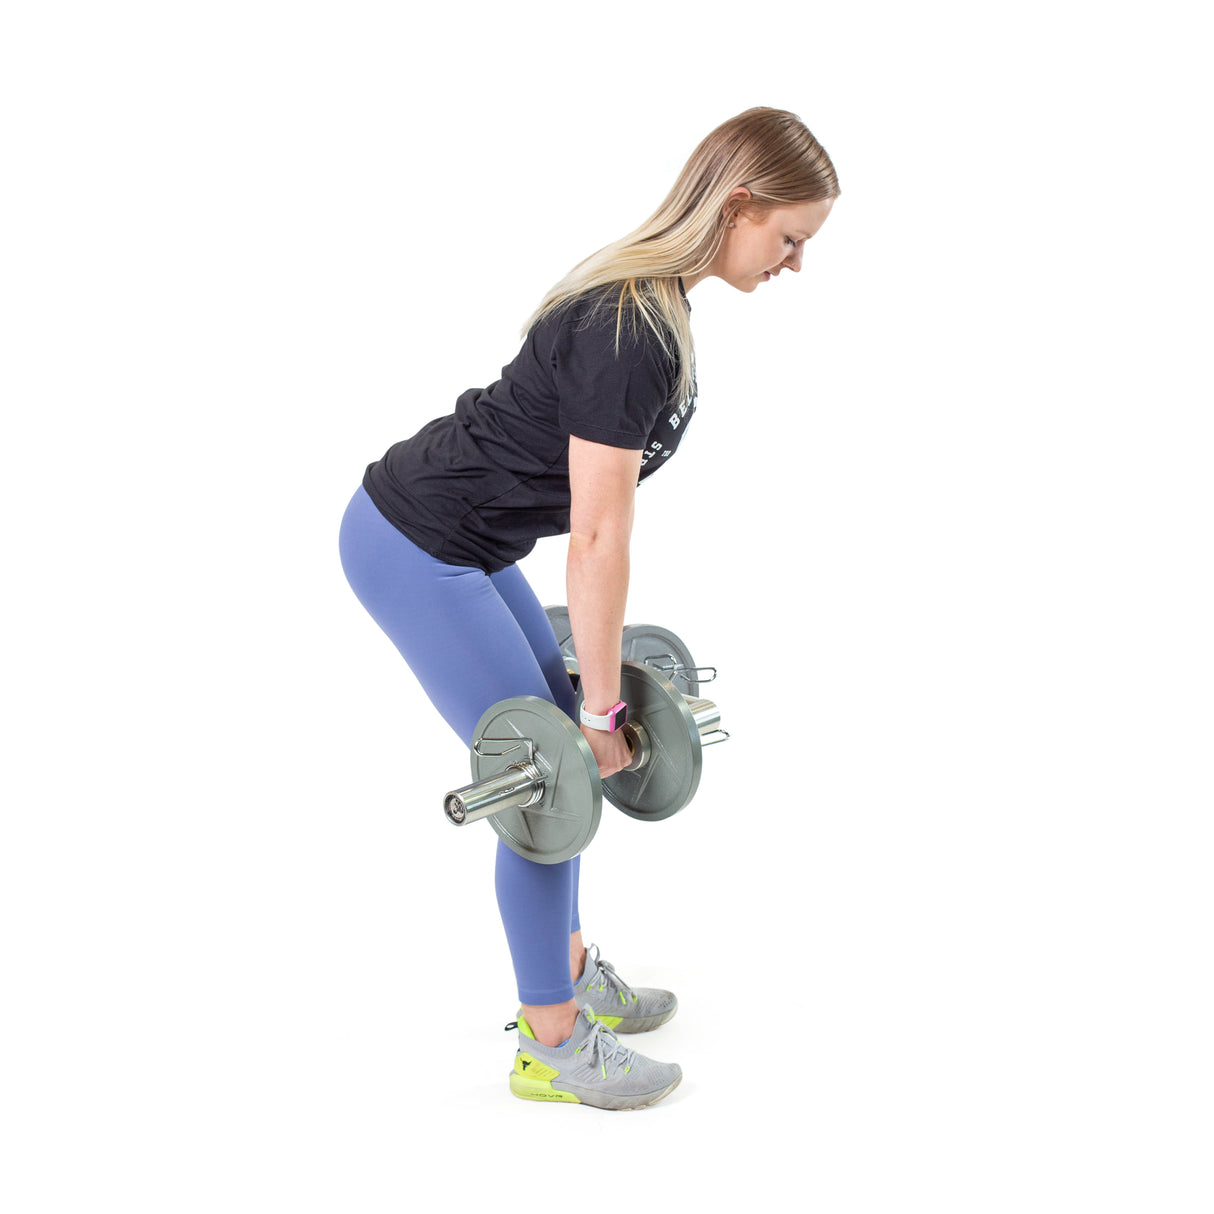 Female athlete exercising with Loadable Dumbbell Handle - Standard